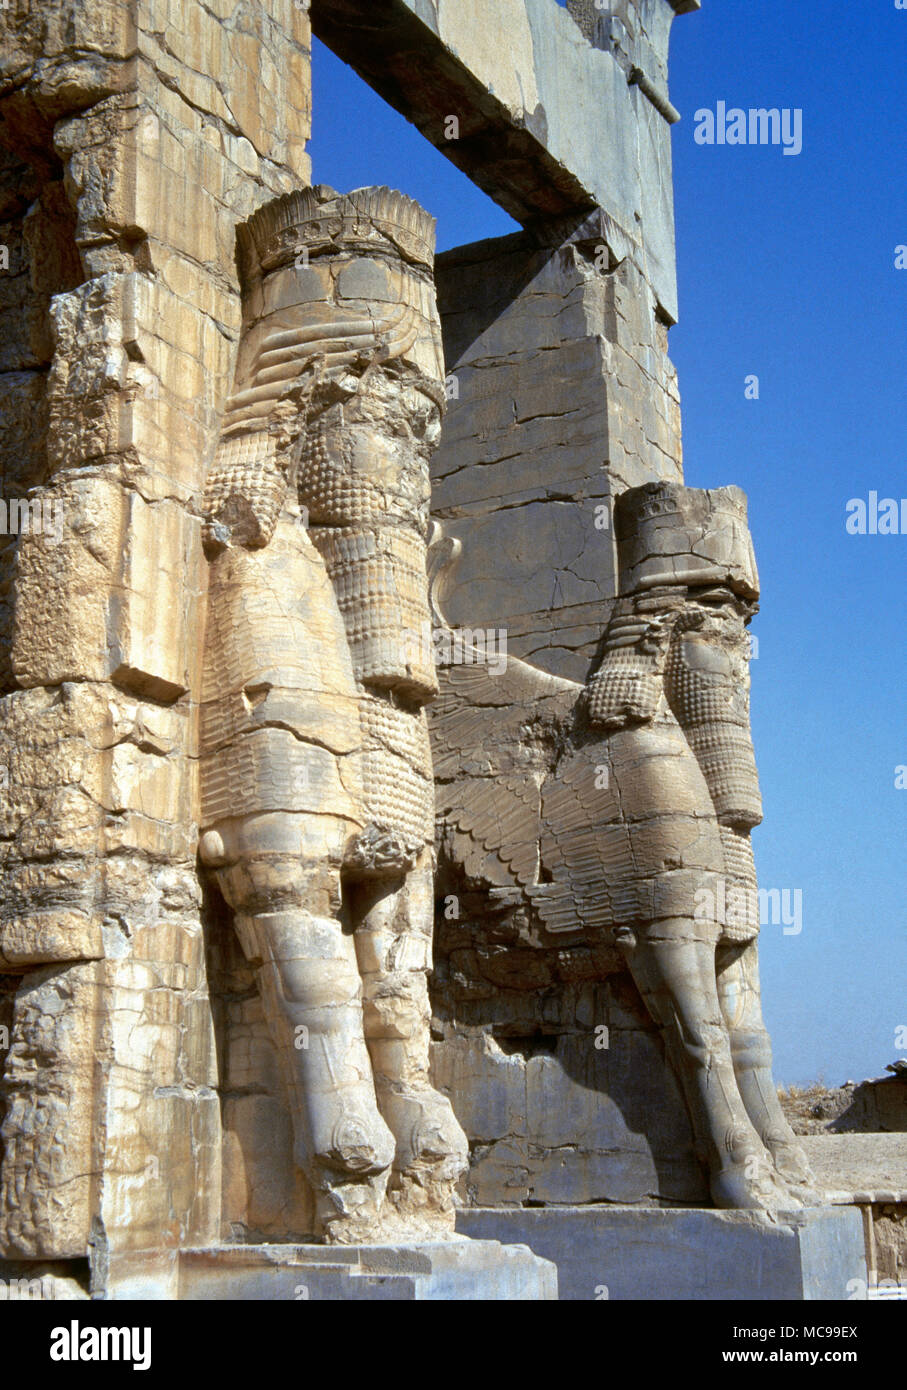 Ancient city of Persepolis. Gate of All Nations or The Gate of Xerxes. Its construction was ordered by Achaemenid king Xerxes I (486-465 BC). Lamassu in the Assyrian style. Fars province. Islamic Republic of Iran. Stock Photo